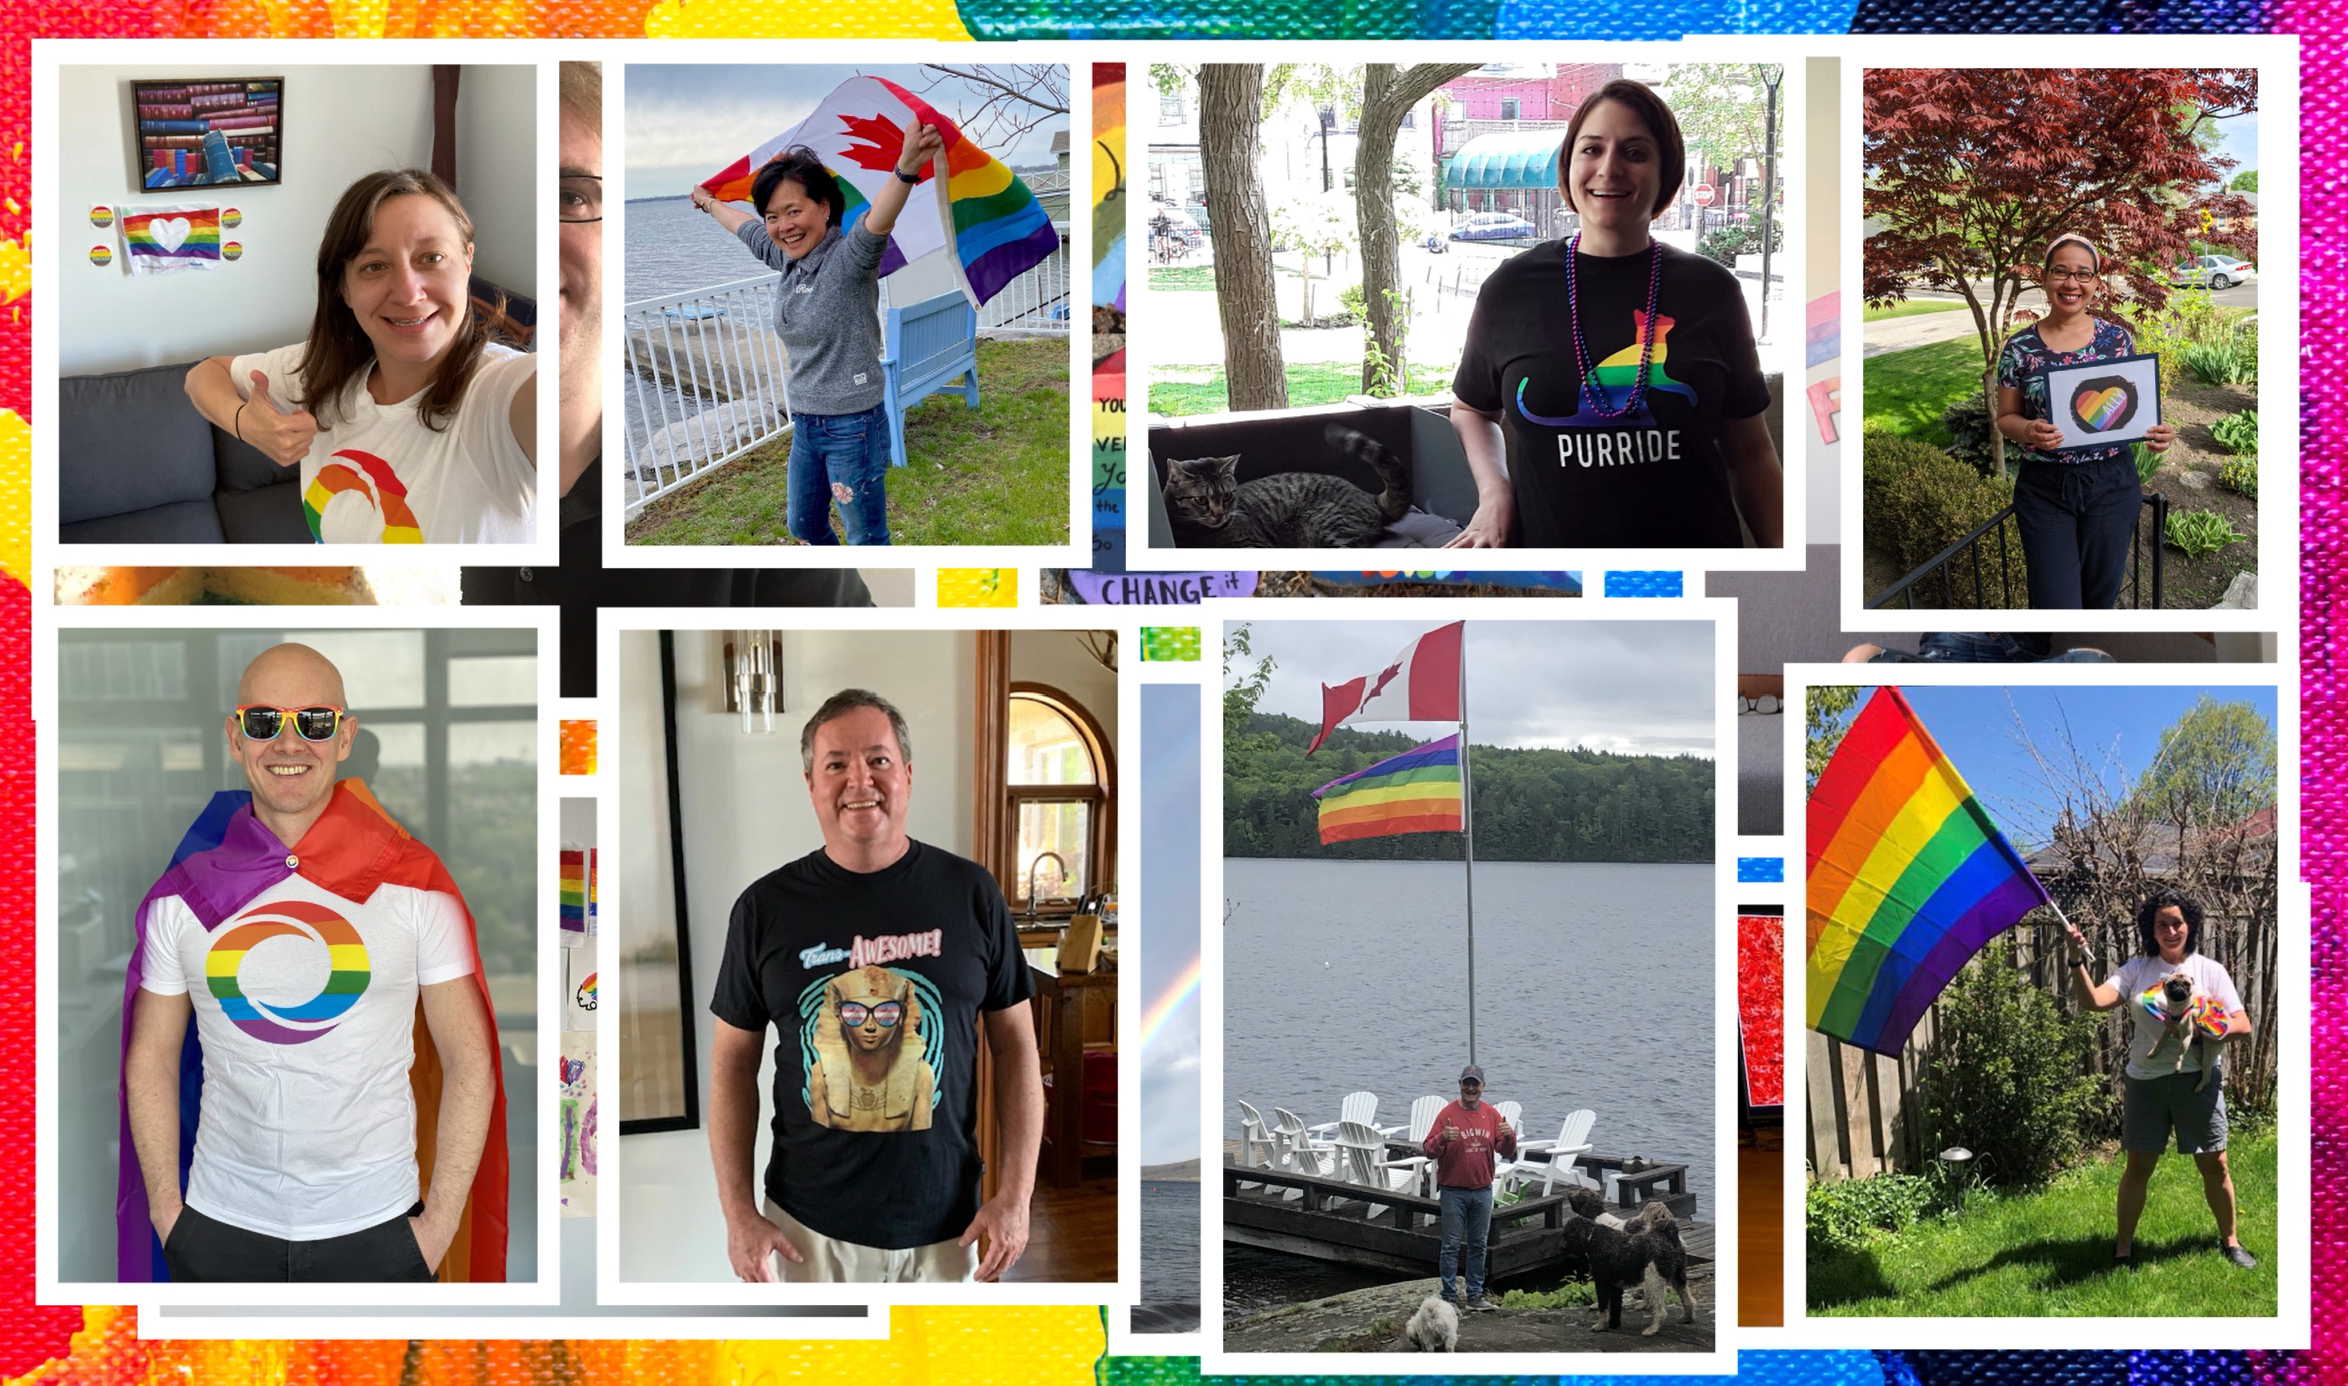 Different of image of people wearing an OMERS shirt with a rainbow O, and others holding/wearing the rainbow flag